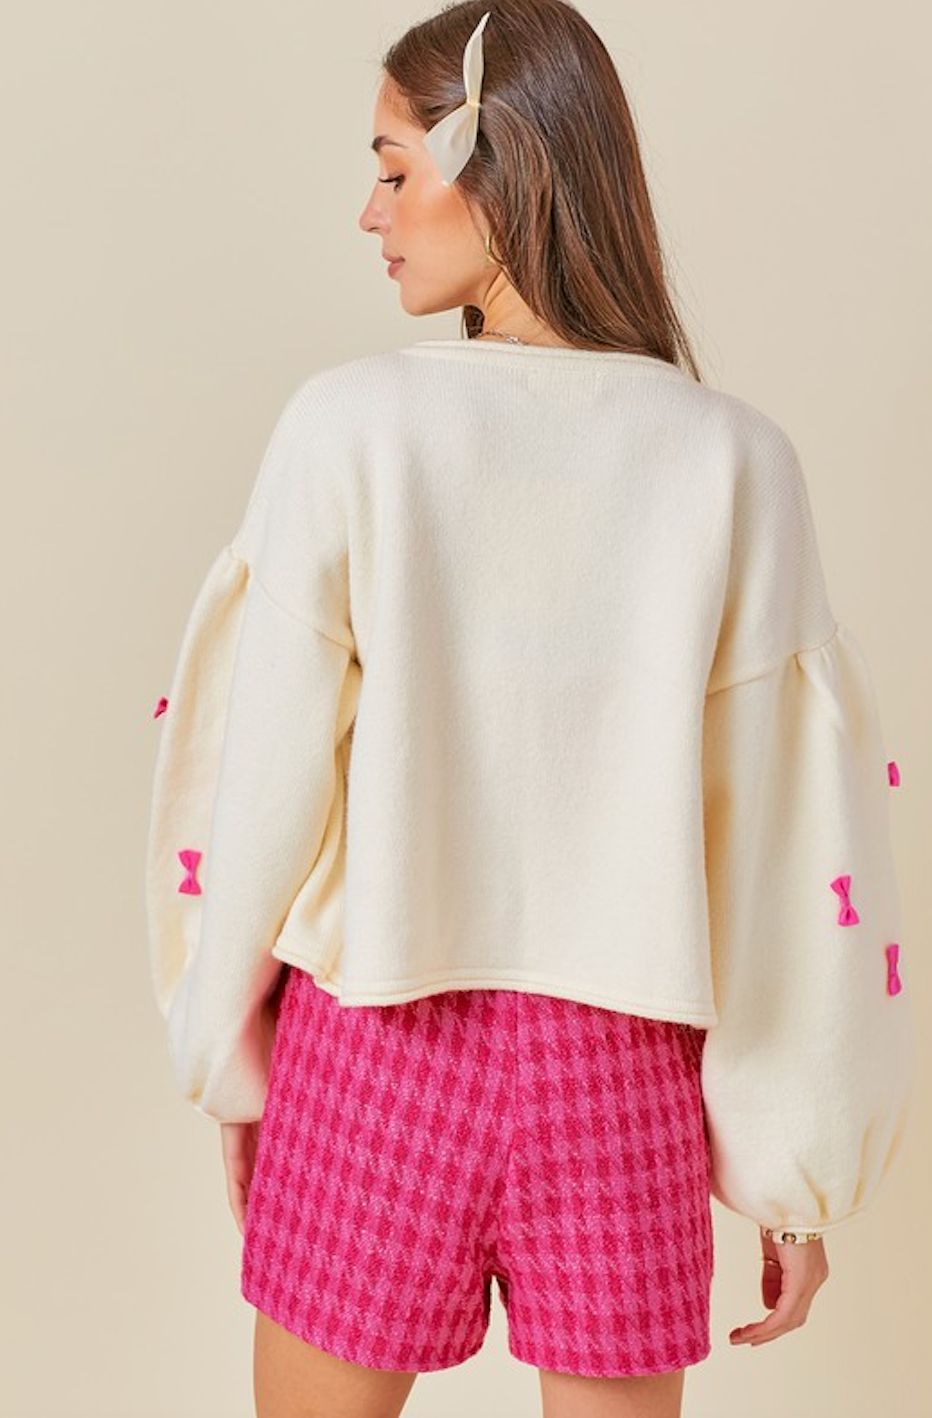 VIVIAN OPEN KNIT CARDIGAN IN IVORY AND PINK